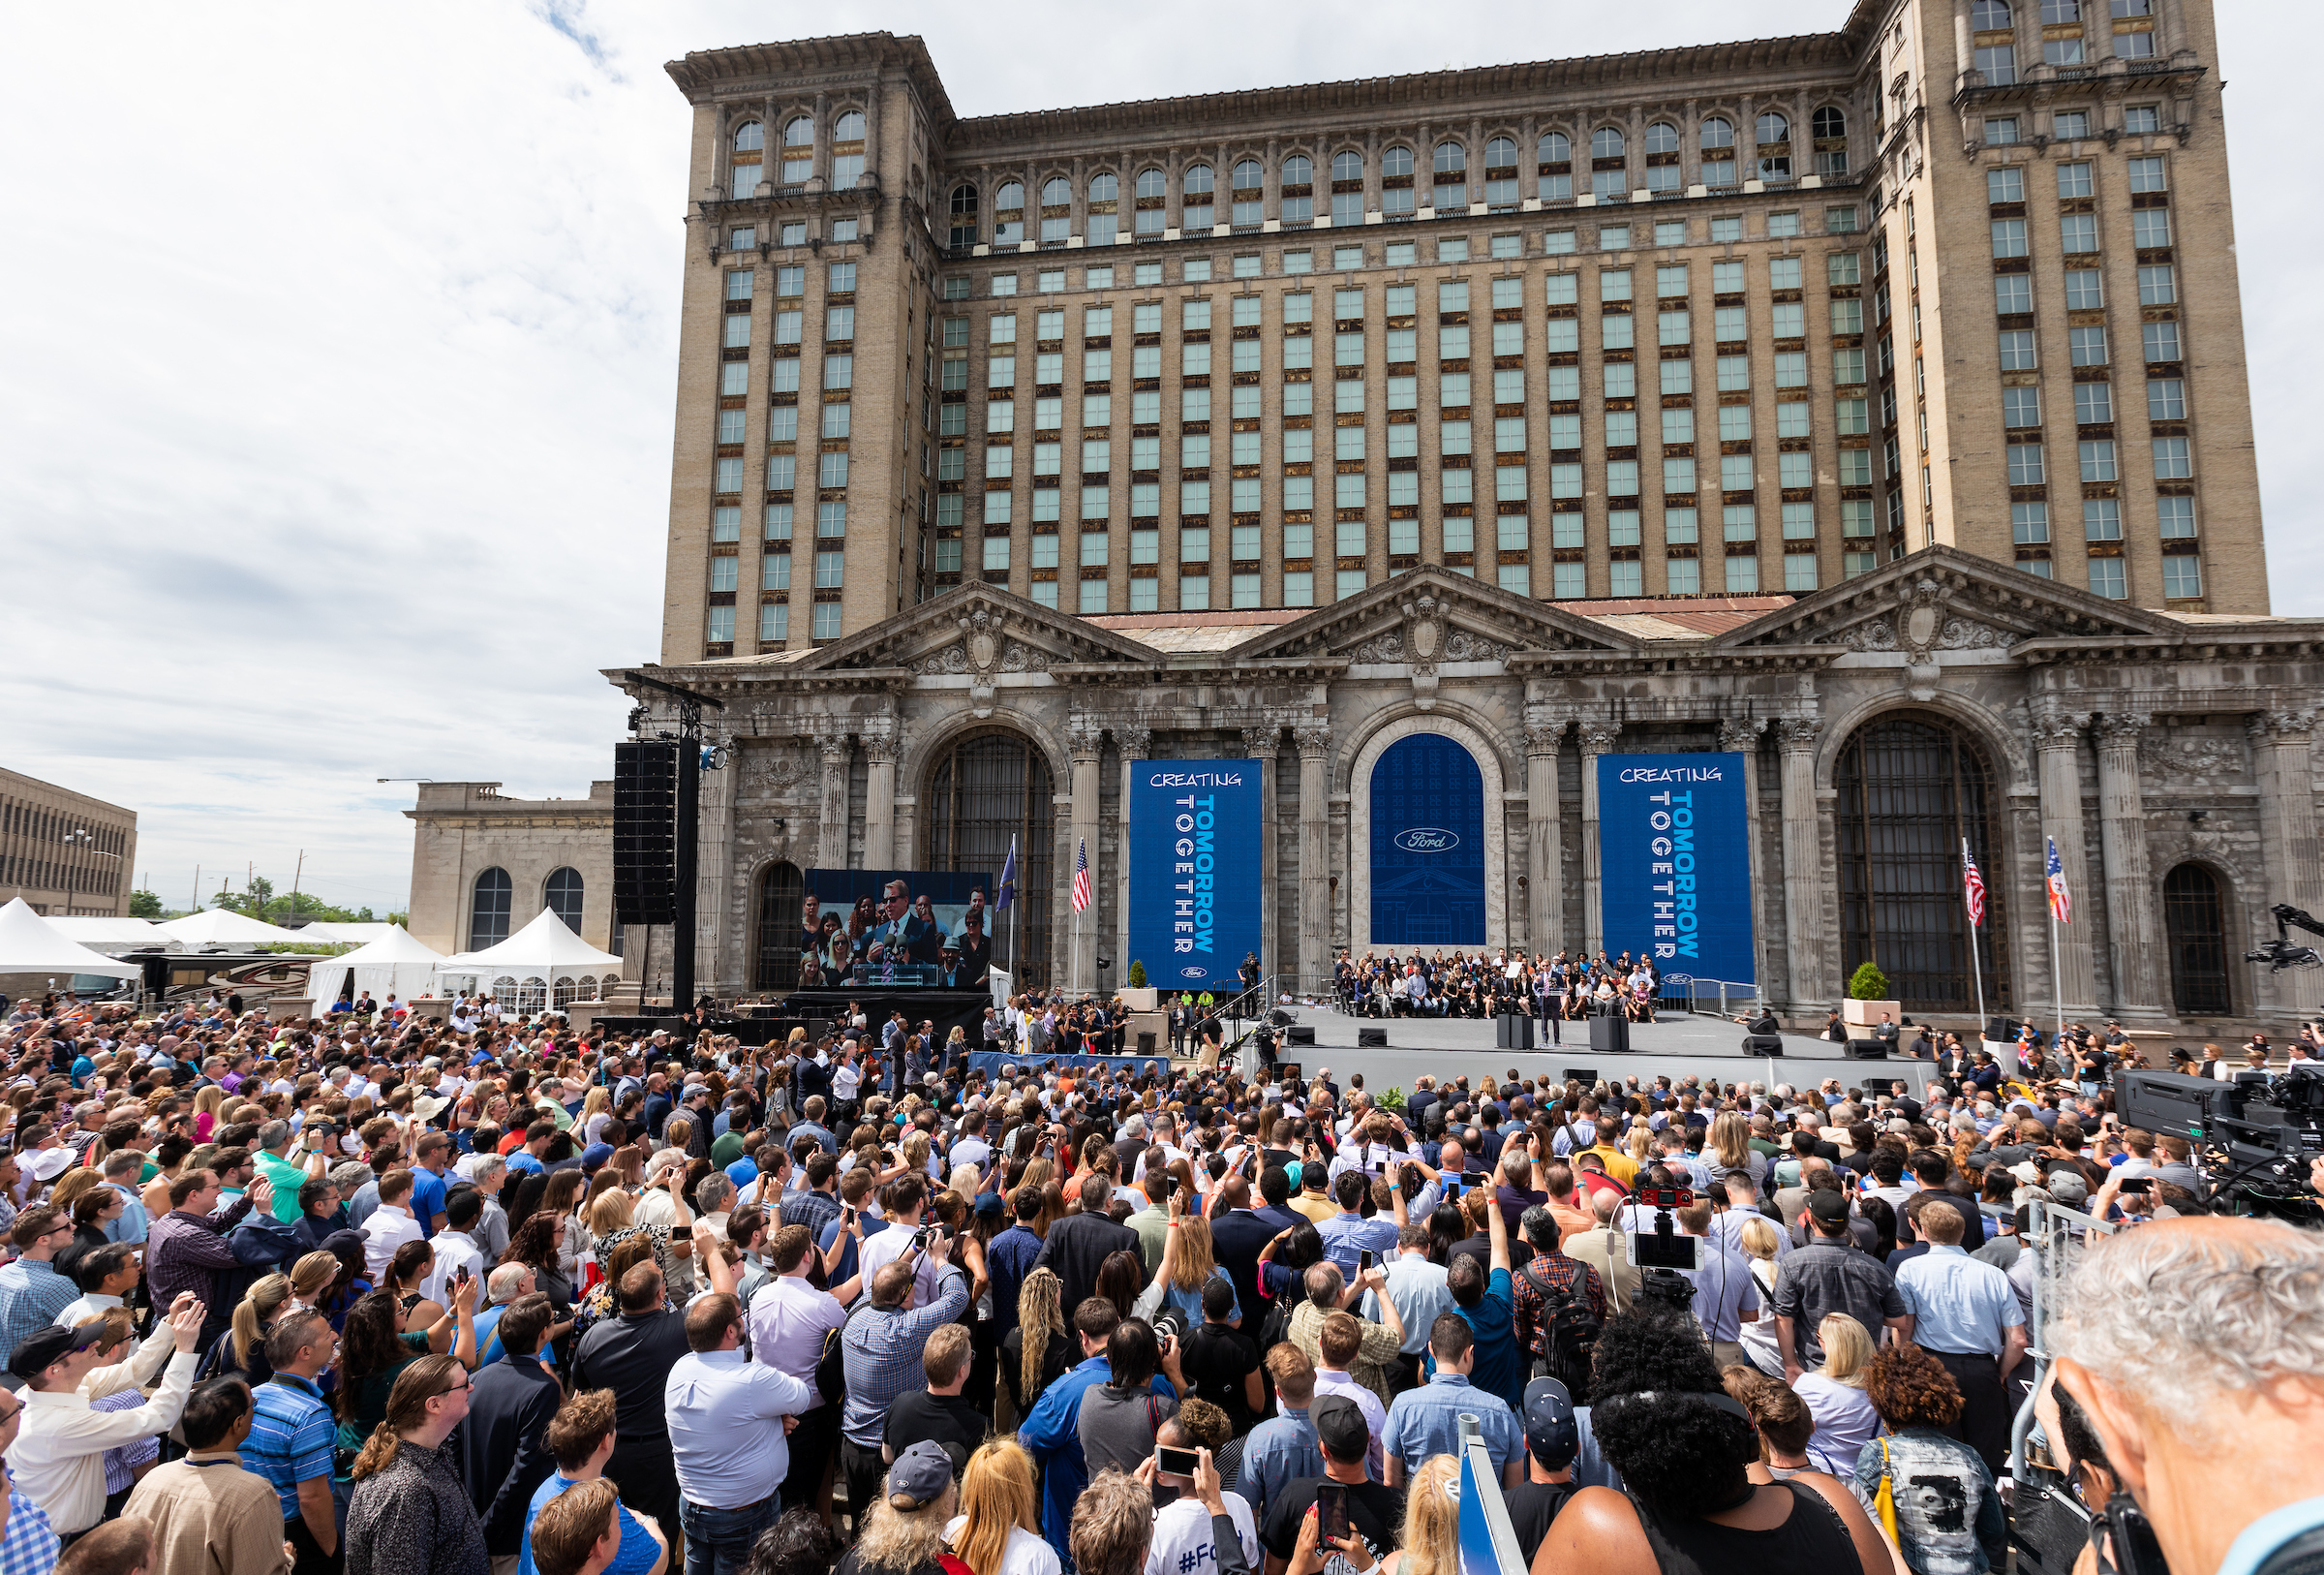 A large crowd of people gather outside a podium set up in the front of a tall, abandoned and ornate building. Two signs flanking the stage read “Creating Tomorrow Together.”